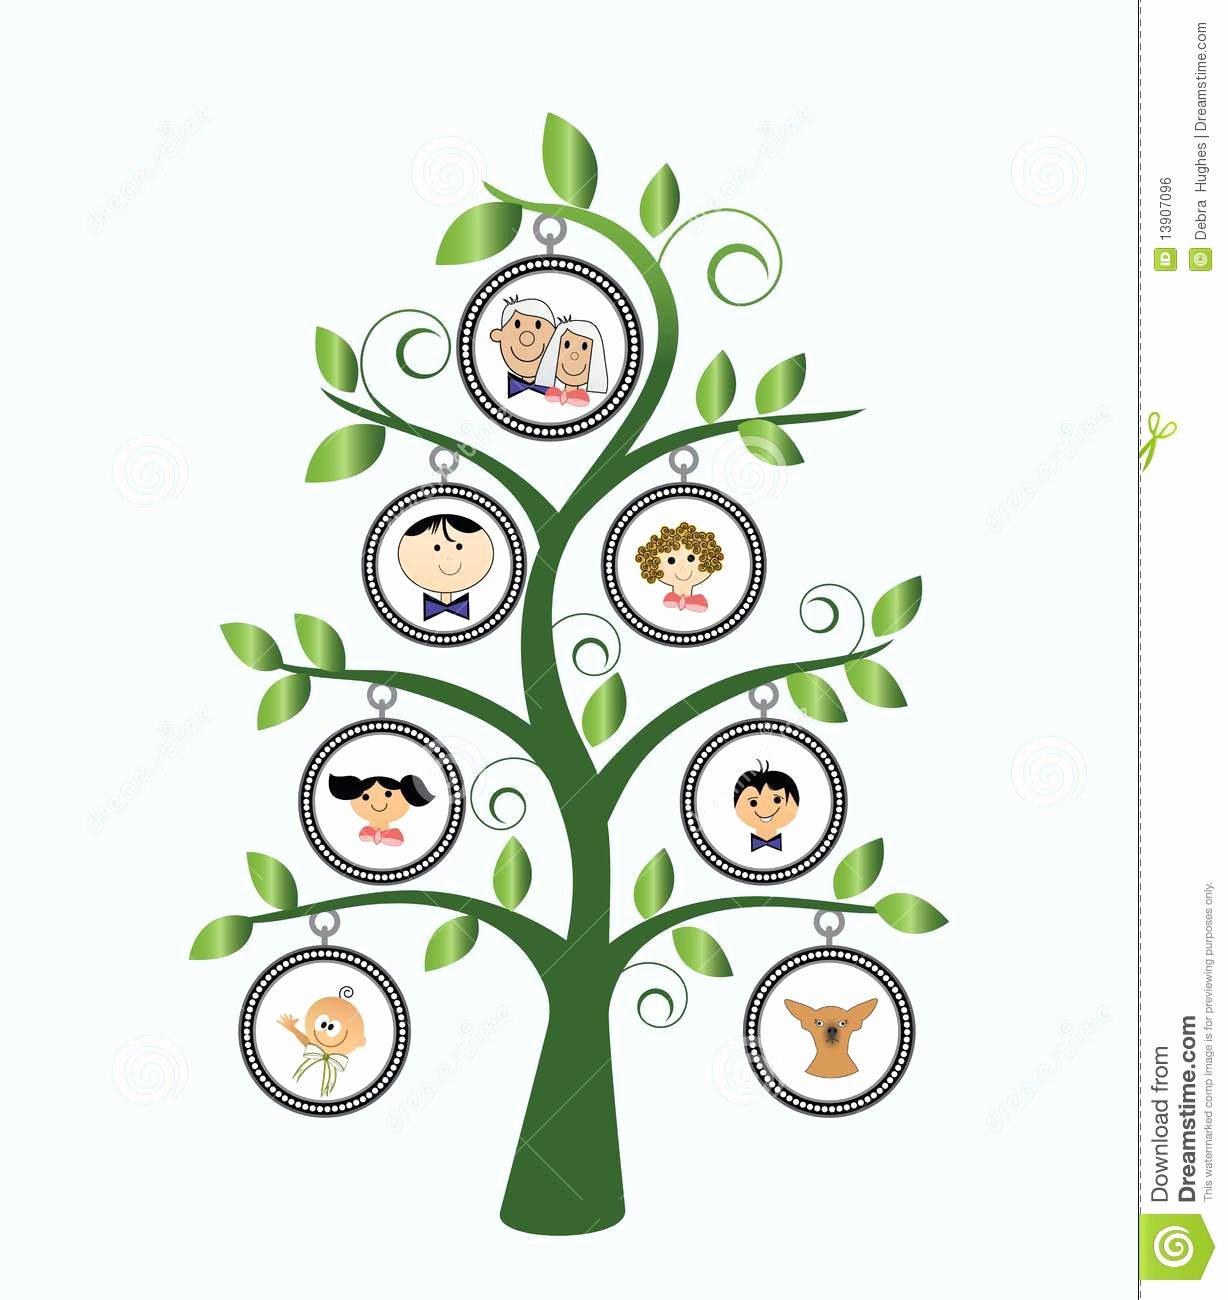 Picture Of A Family Tree Luxury Family Tree Stock Vector Illustration Of Grandchildren